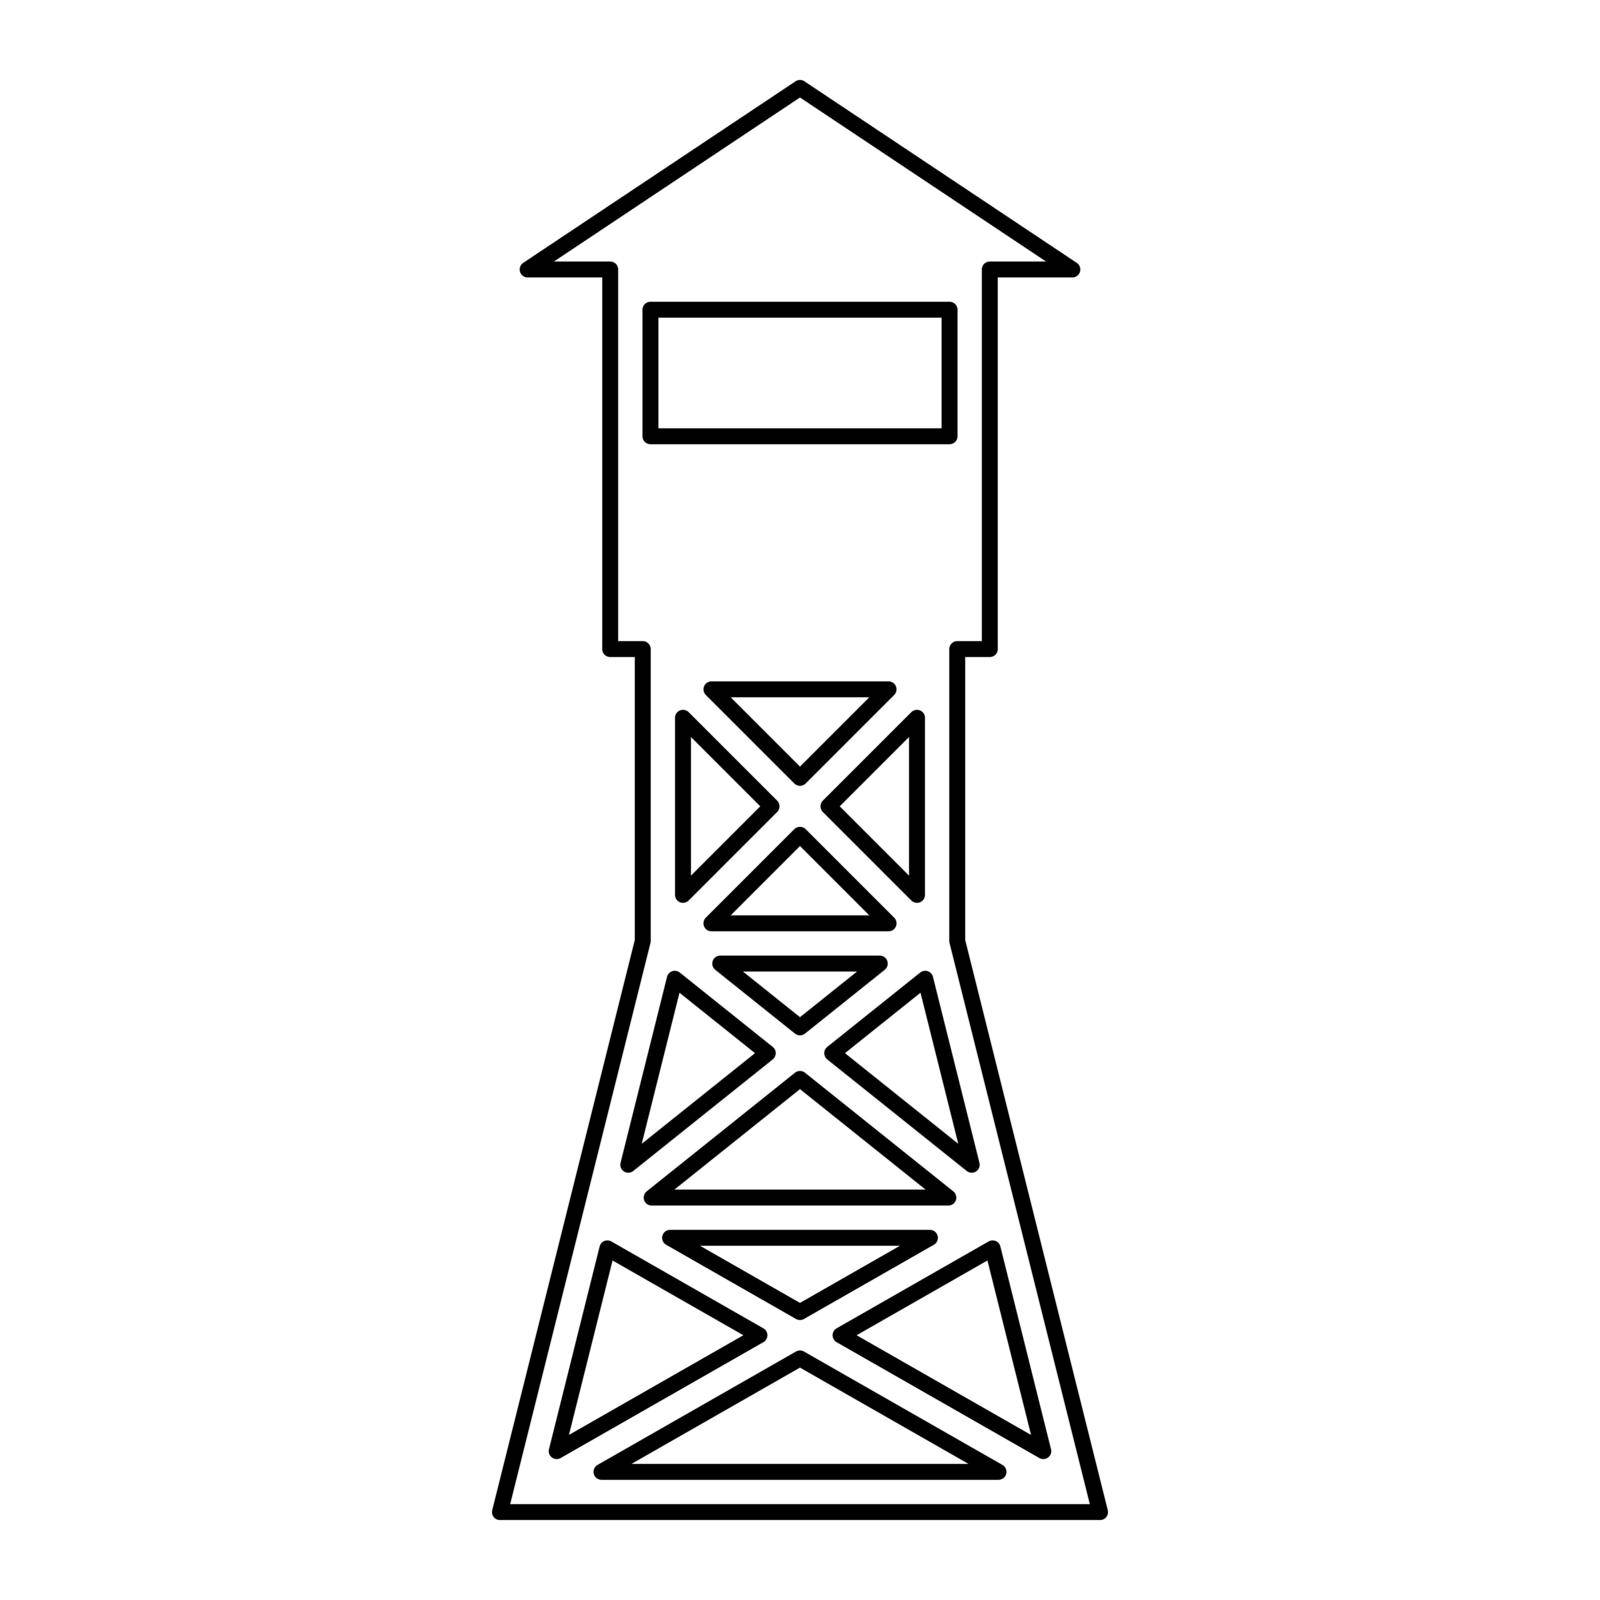 Watching tower Overview forest ranger fire site contour outline icon black color vector illustration flat style simple image